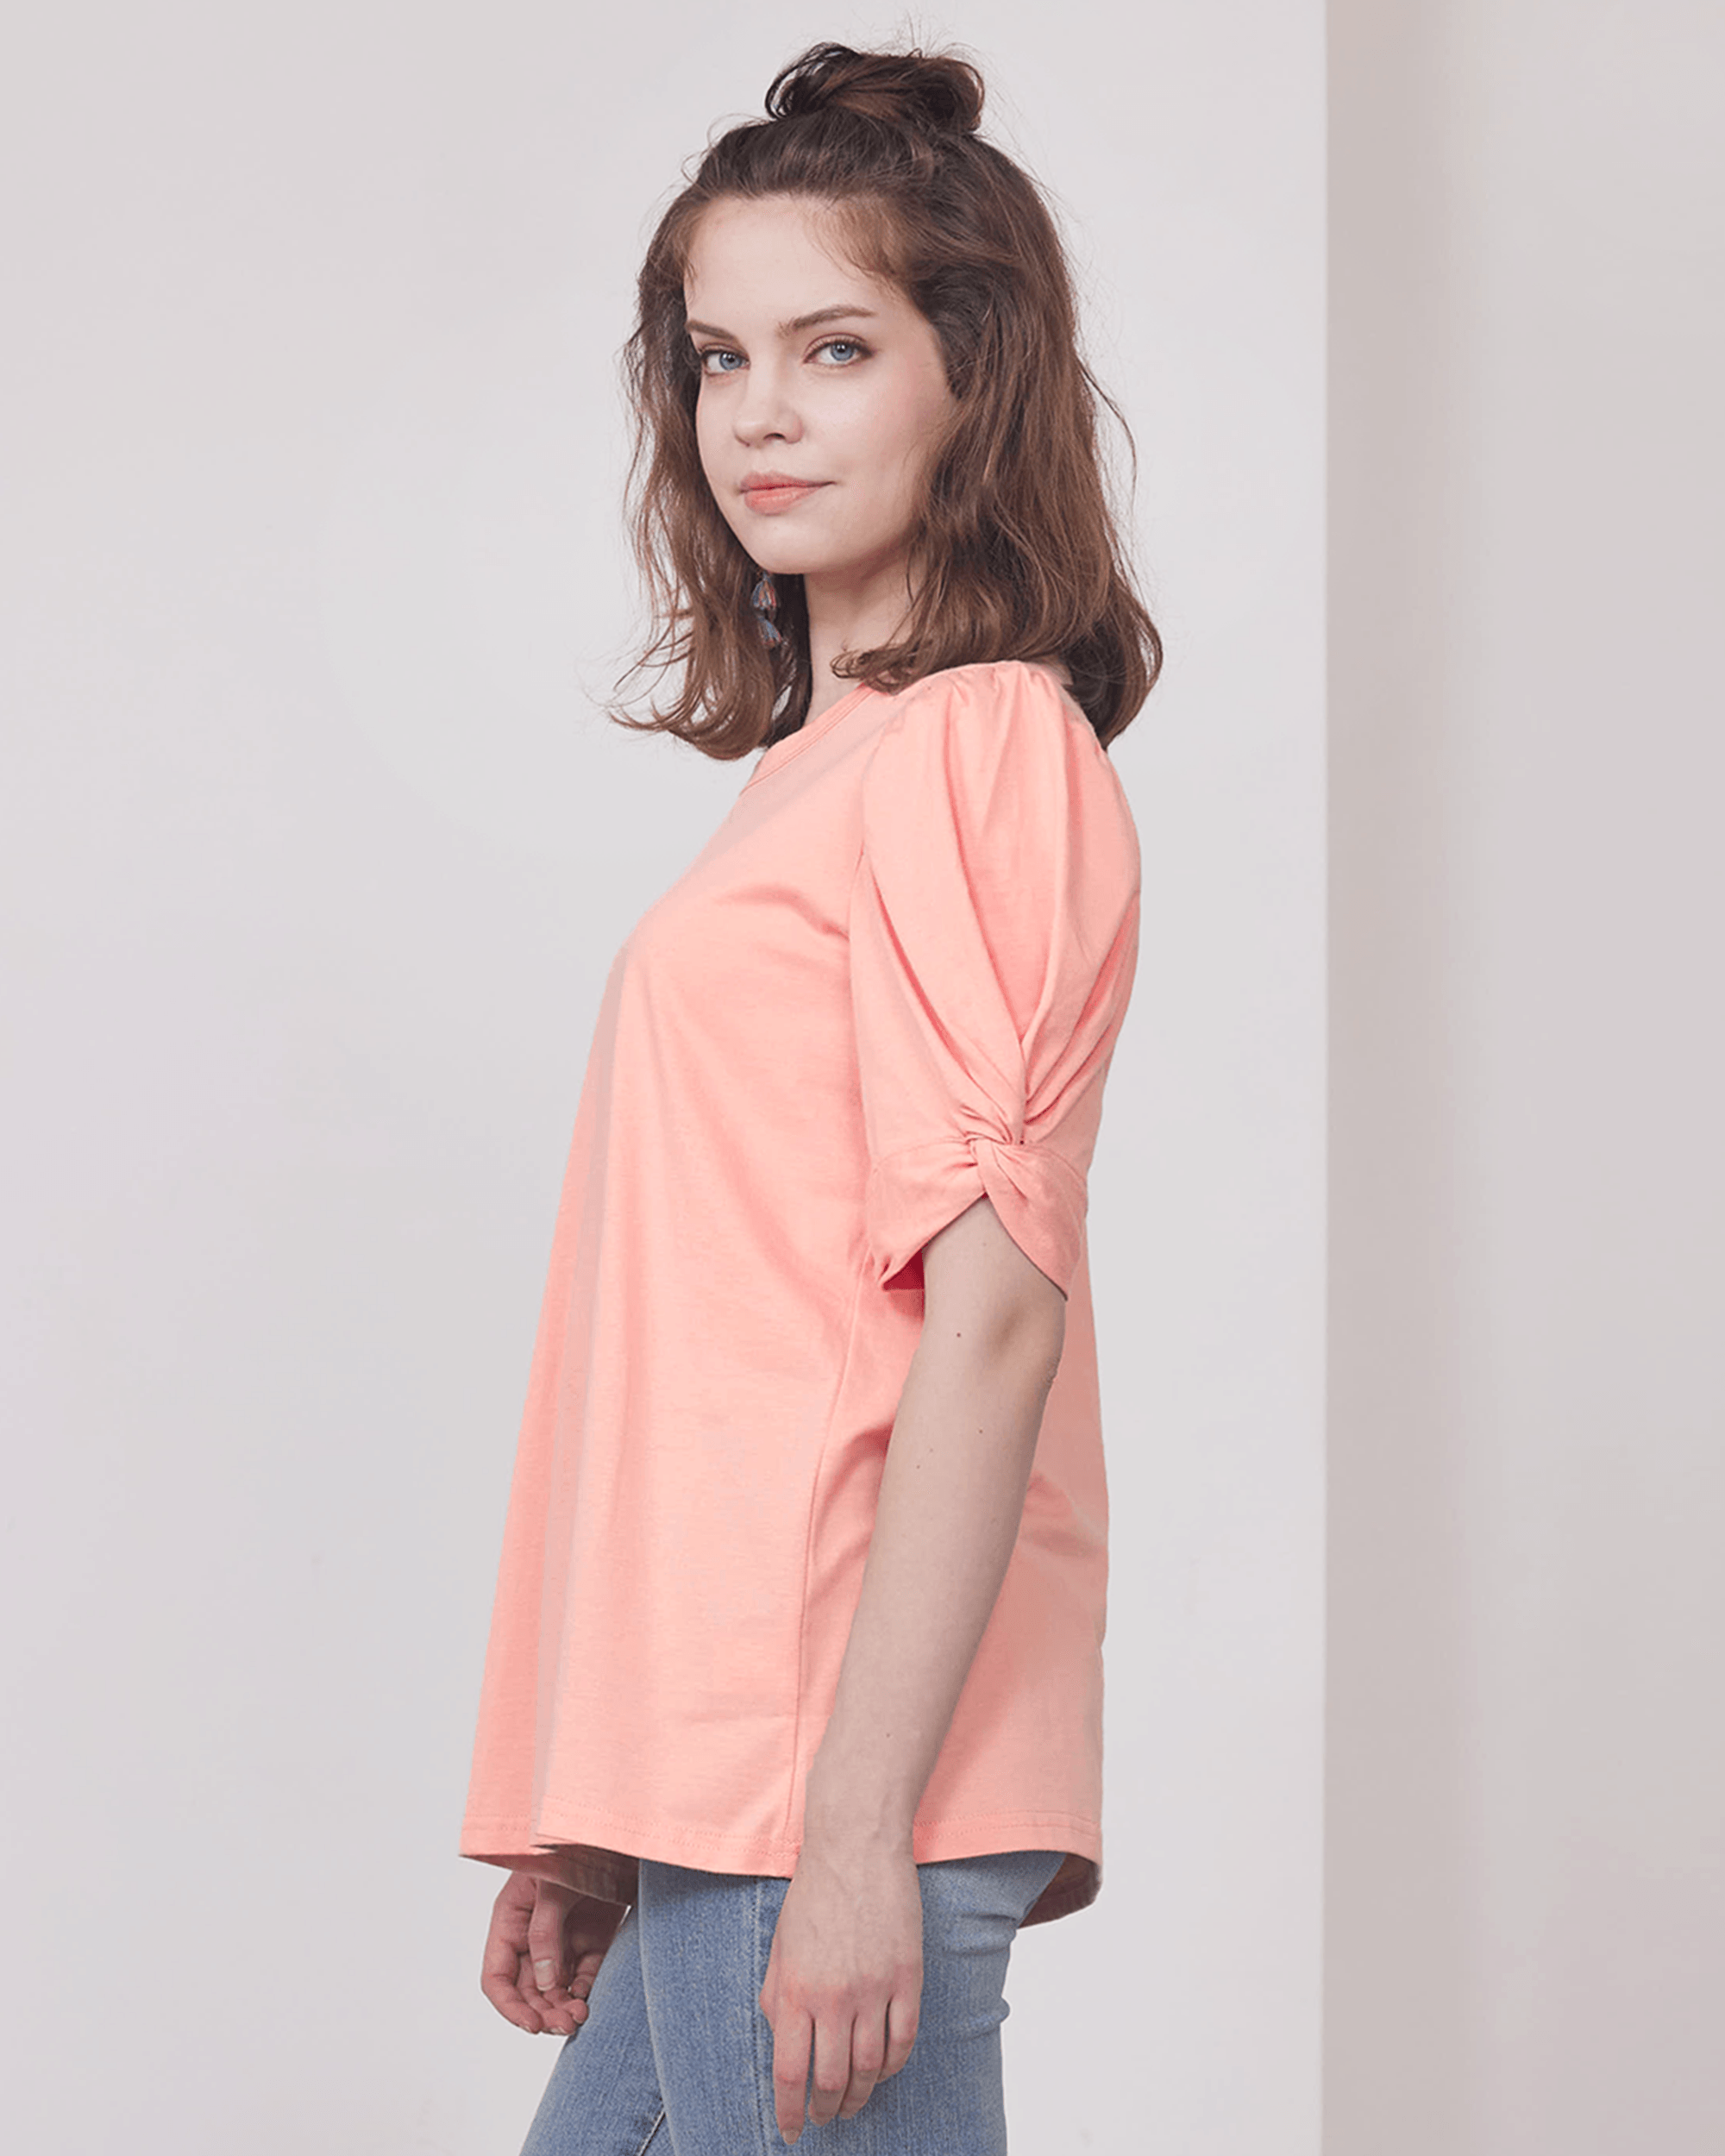 Knotted Puff Sleeve Top - Orange Peach